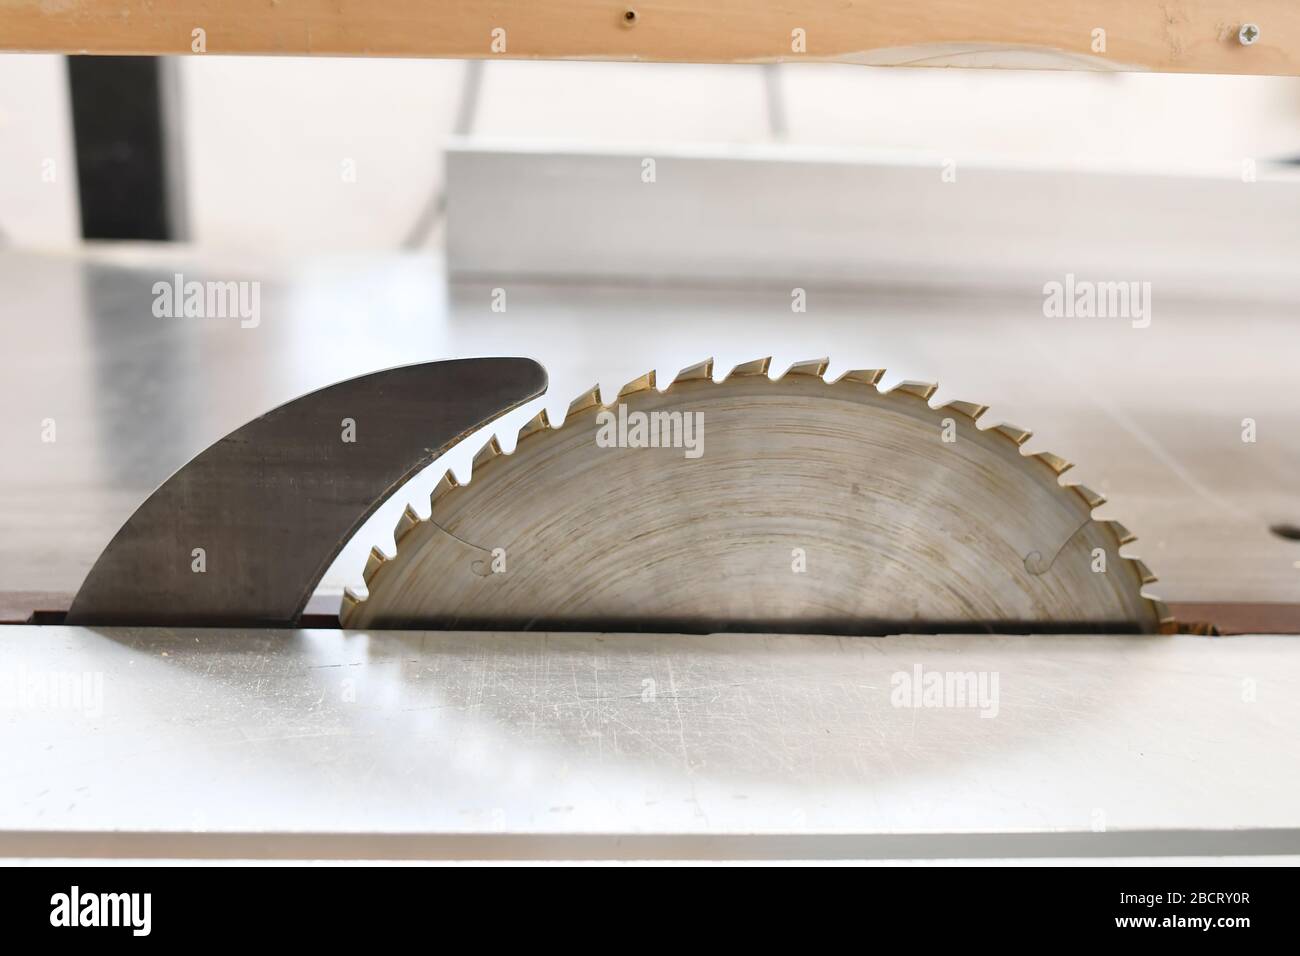 Fragment of a joint wood cutter on a brushed metallic surface. The diamond disc of a wood cutting machine Stock Photo